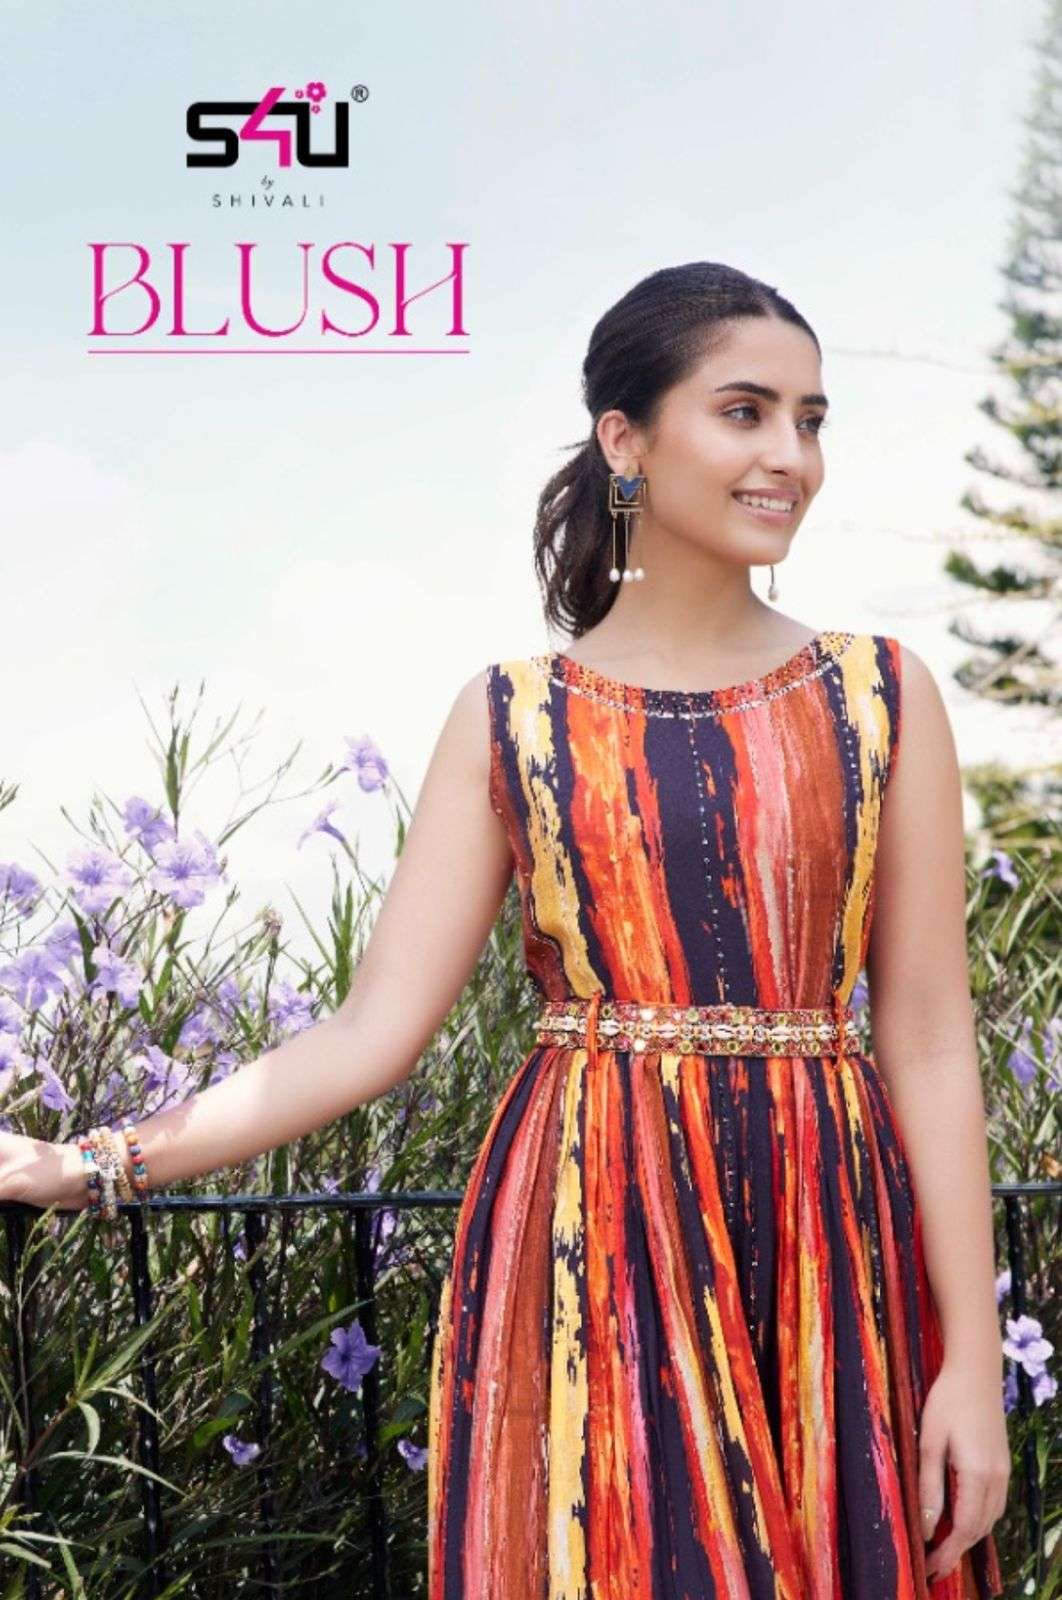 s4u blush digital prints, exclusive designs & relaxing fits of jumpsuits 